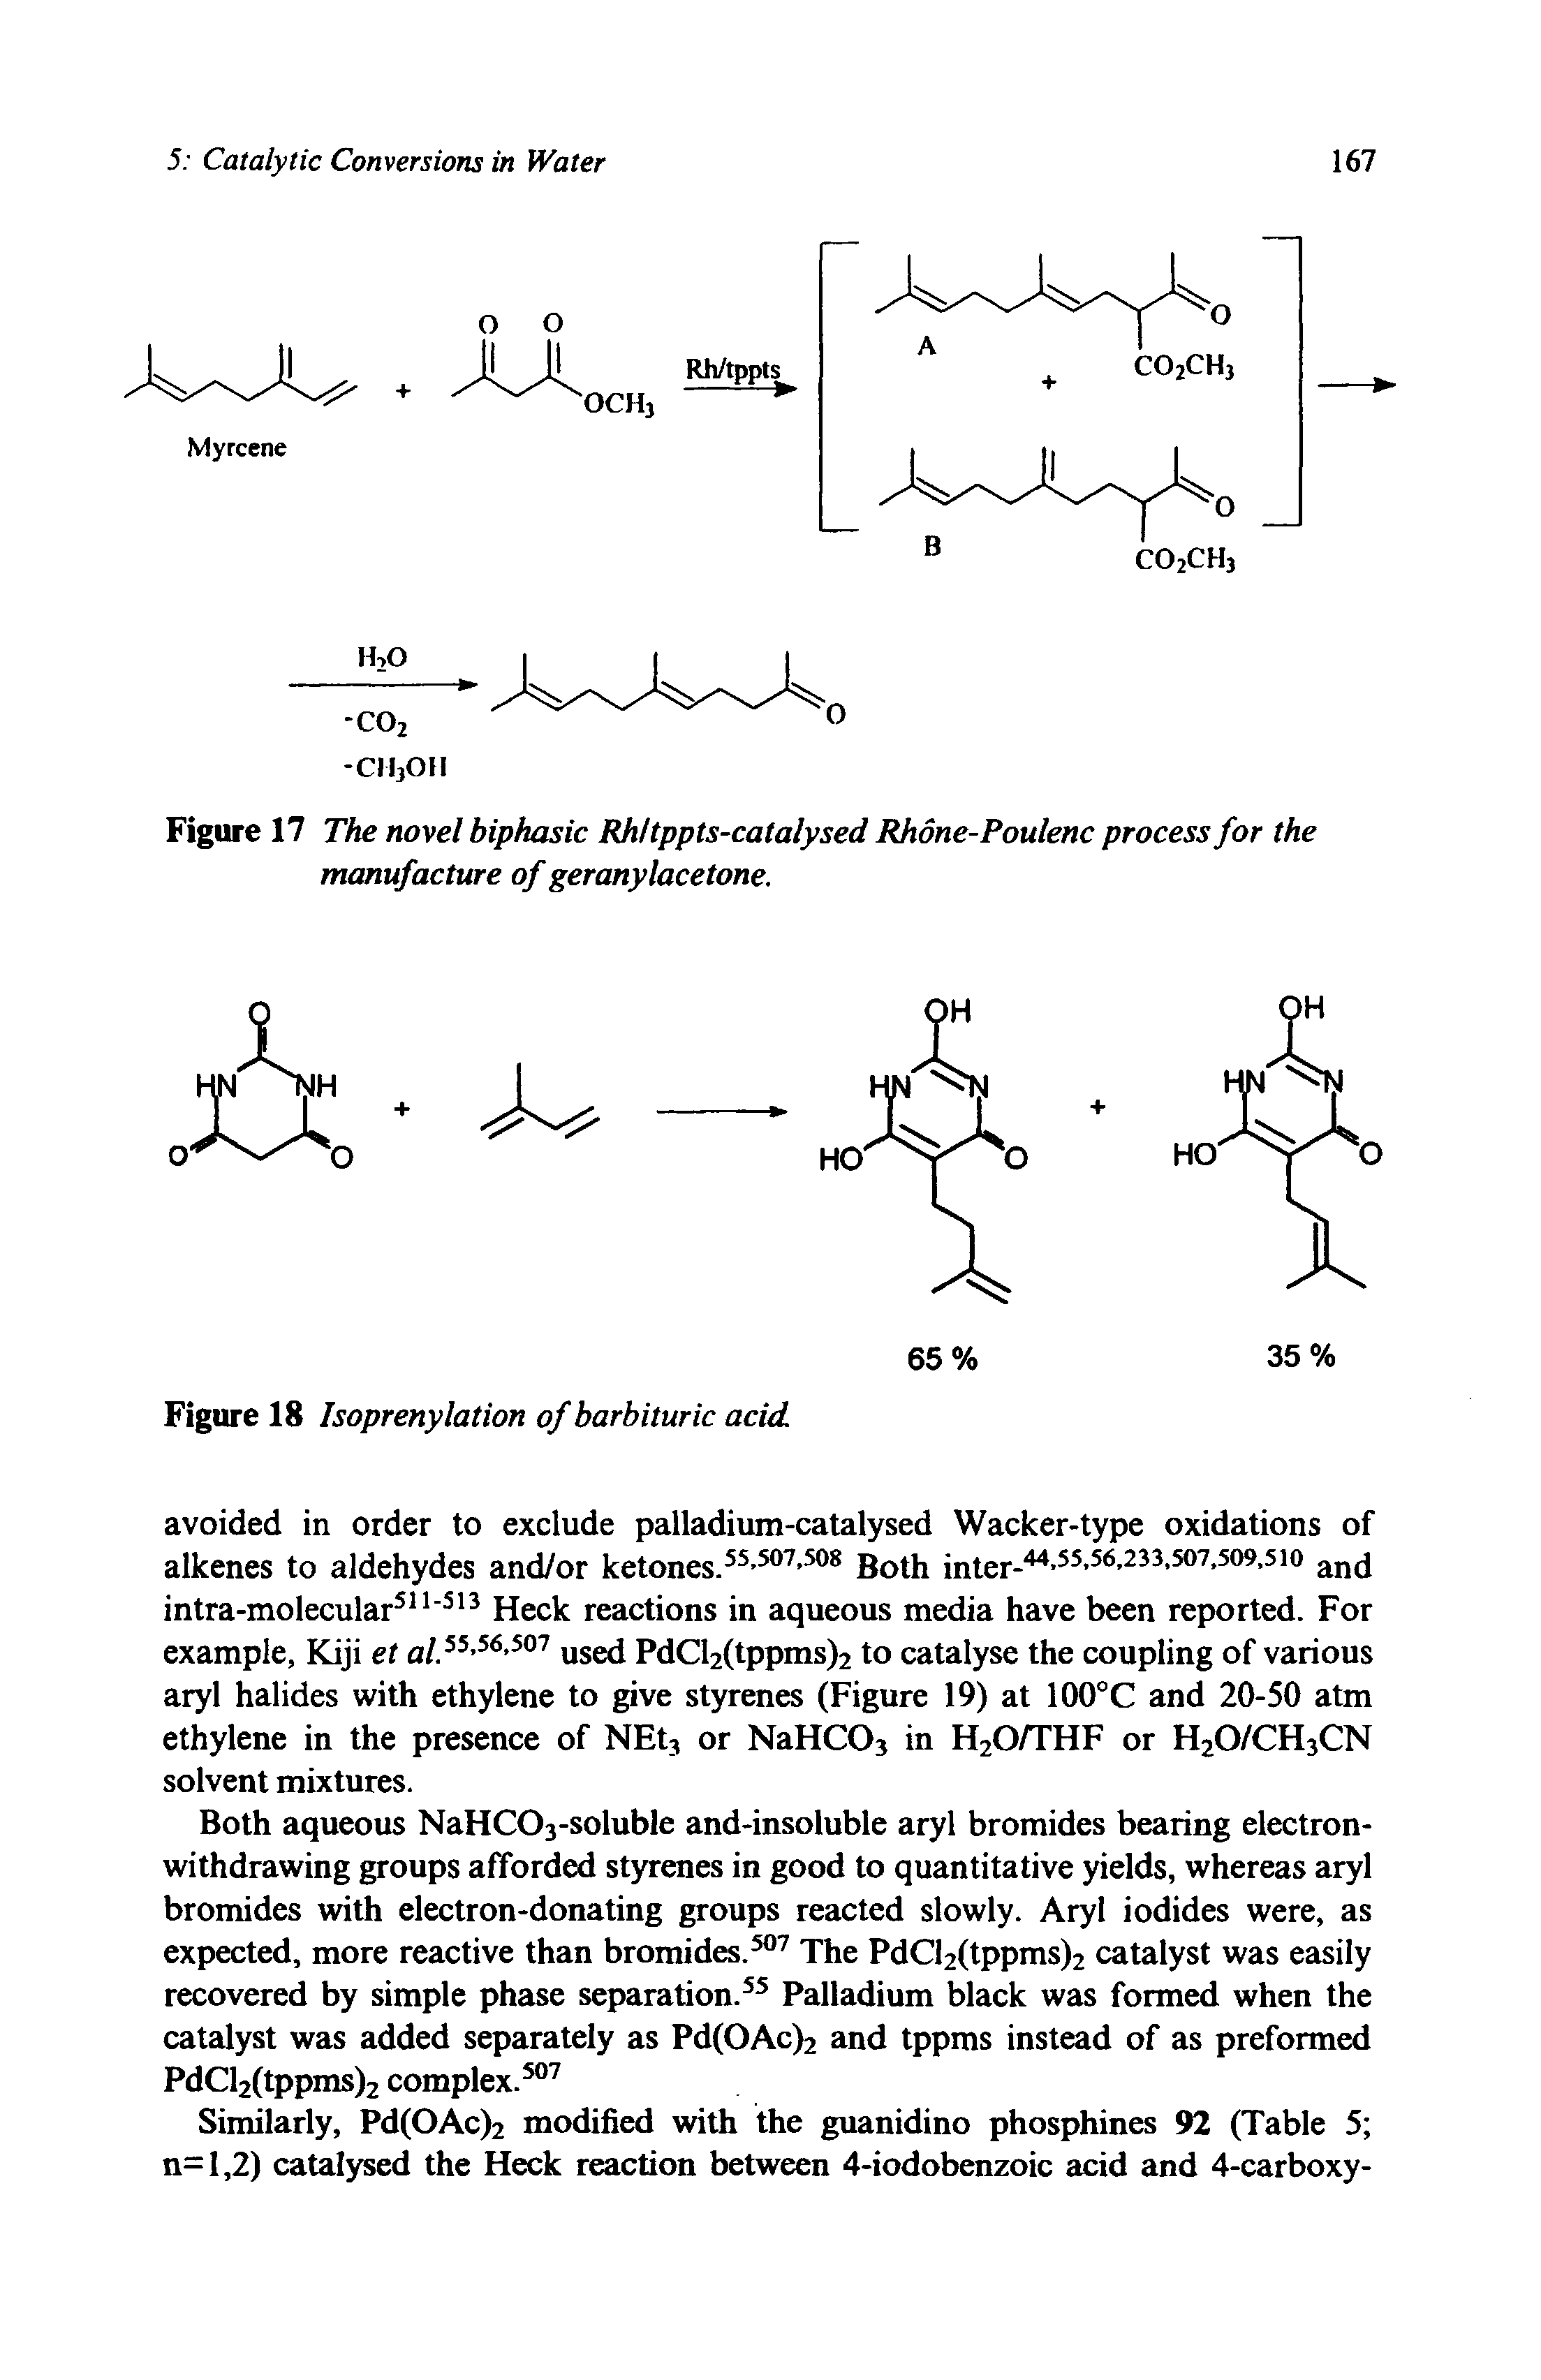 Figure 17 The novel biphasic Rhltppts-calalysed Rhone-Poulenc process for the manufacture of geranylacetone.